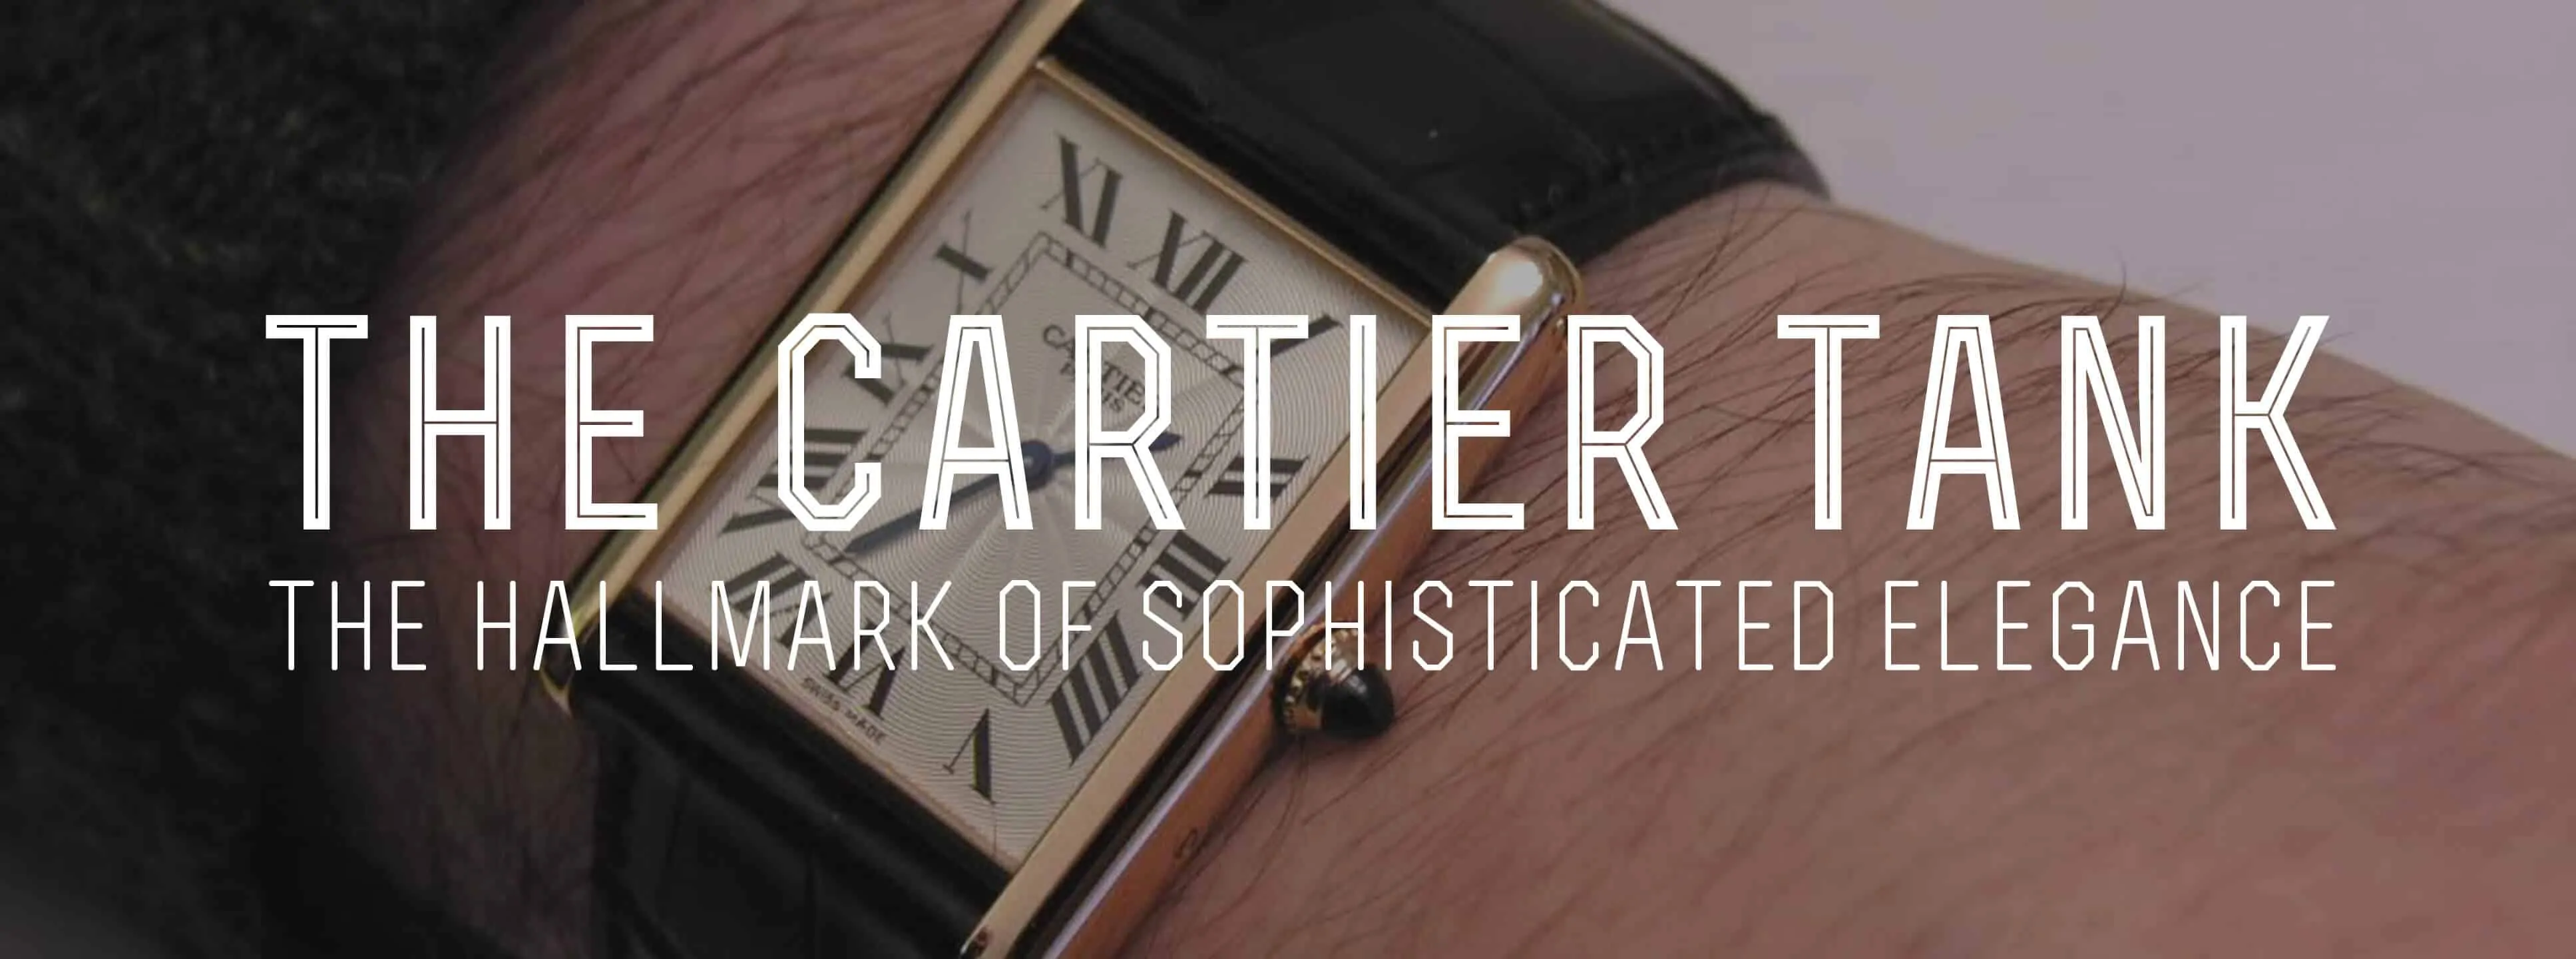 Cartier Tank Française, Yellow Gold Automatic Wristwatch With Date  Available For Immediate Sale At Sotheby's